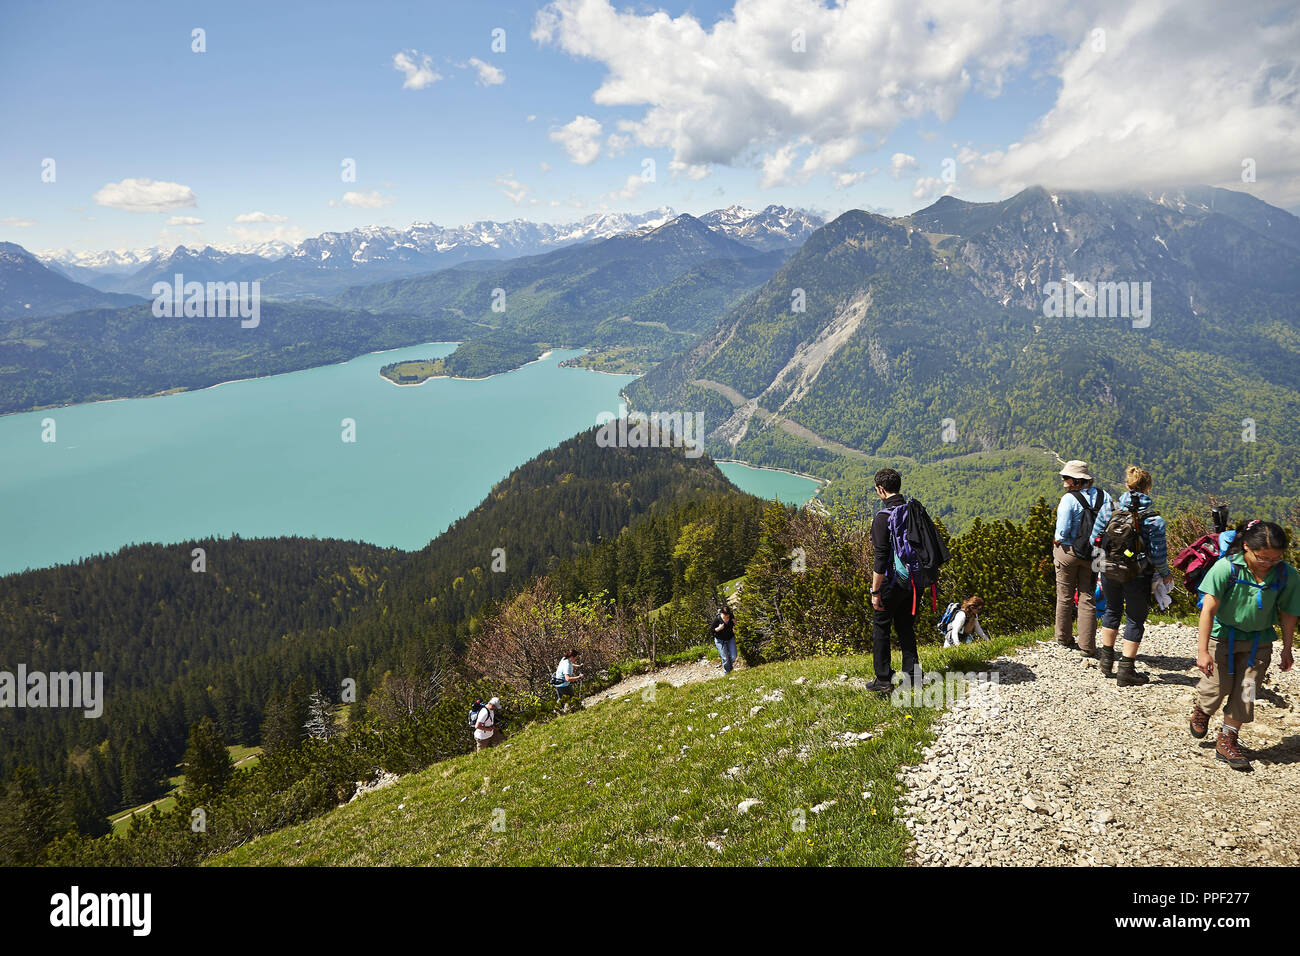 View from Jochberg (1,565 m) on the Walchensee, Bavaria, Germany Stock Photo